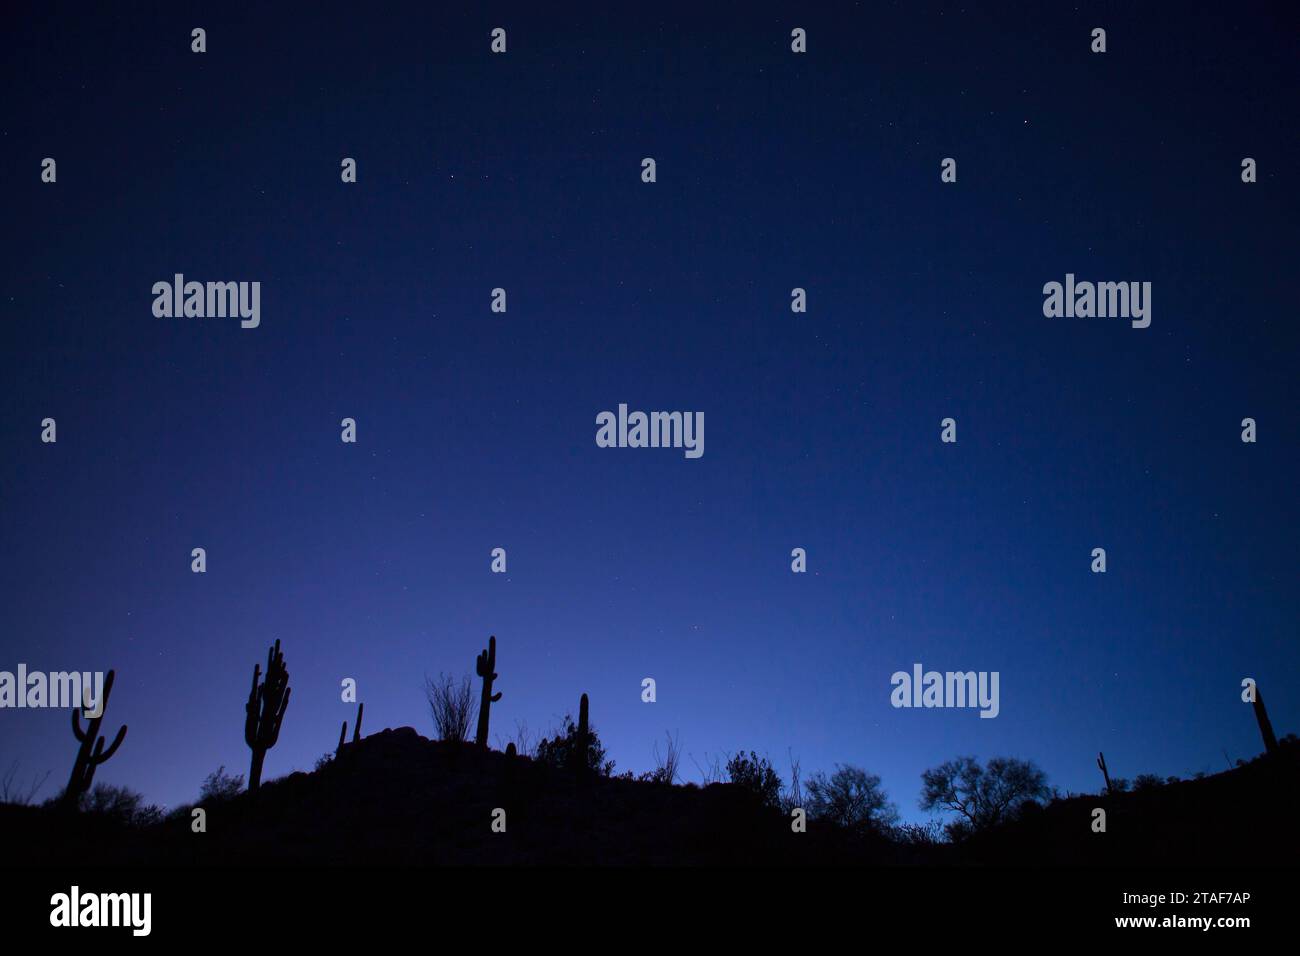 Forested hillside of Saguaro cacti in silhouette stand guard like ancient watchmen at twilight’s blue-hour awash with stars. Stock Photo